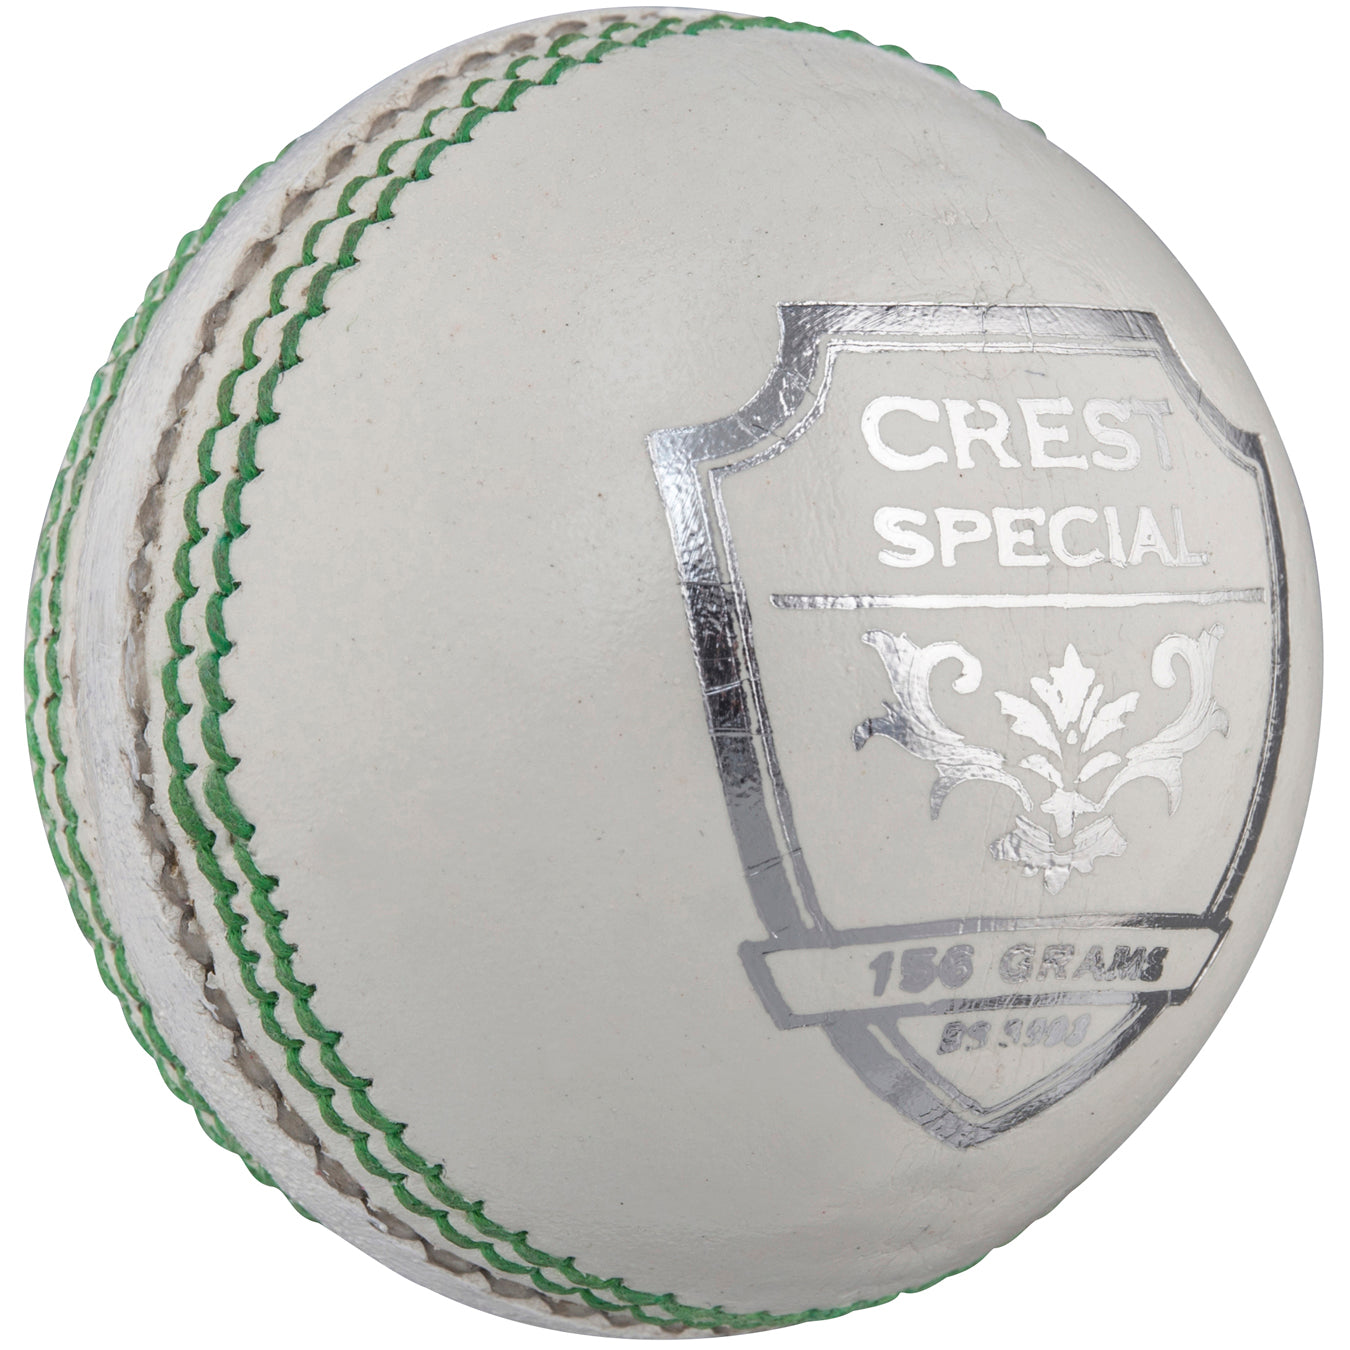 CDAL18Ball Crest Special 156g White Front